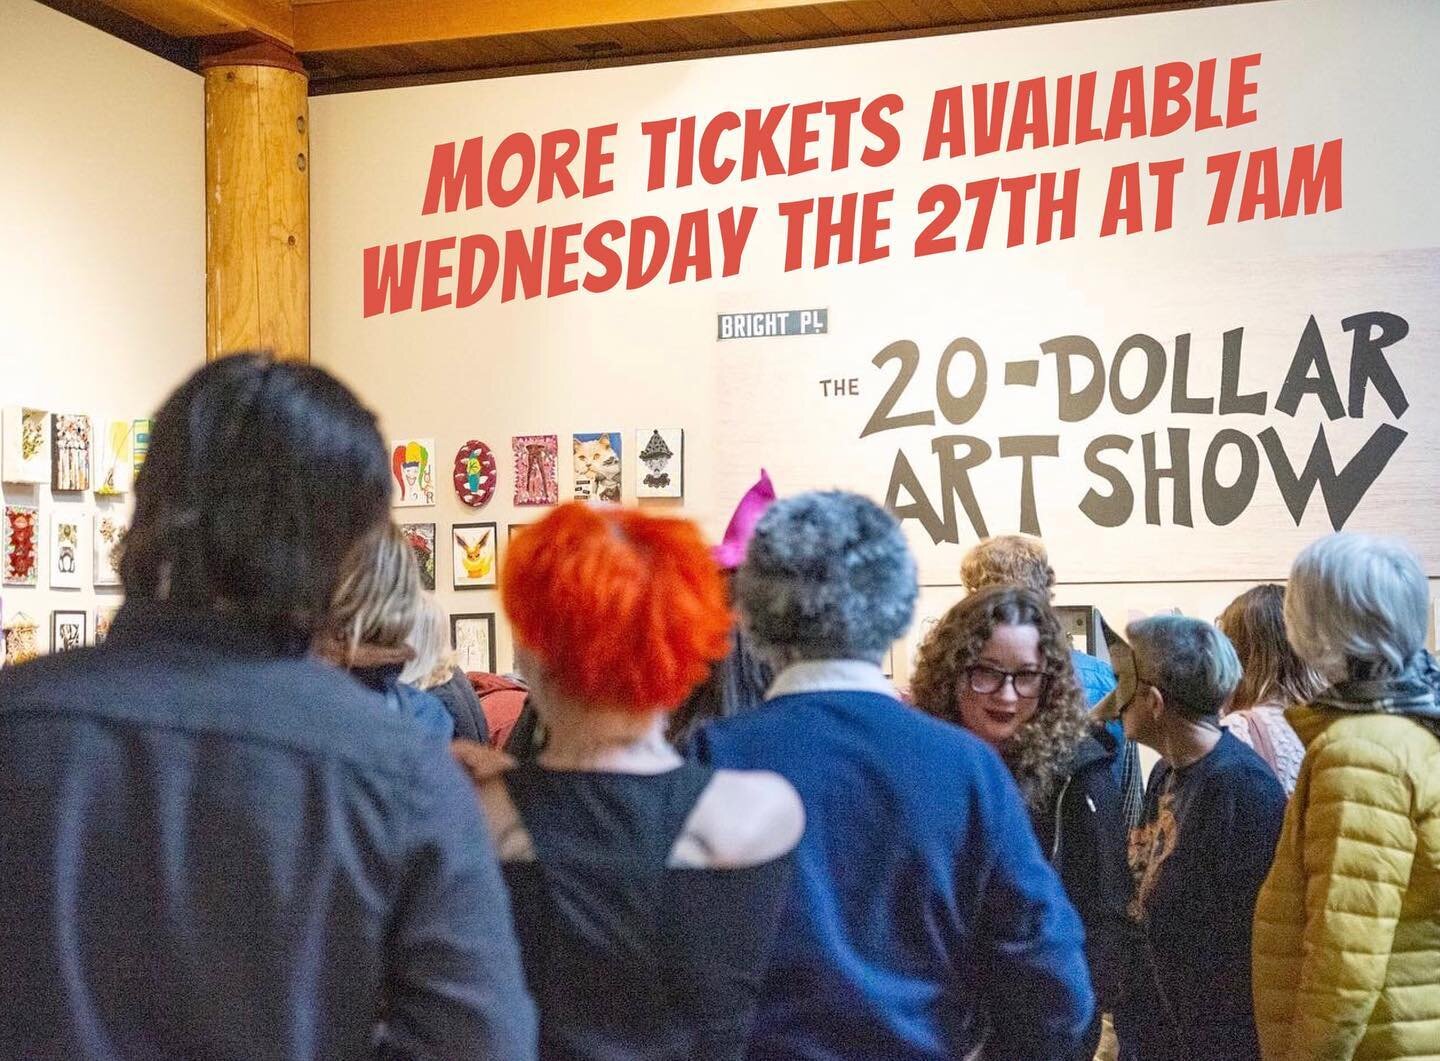 If you missed out on the last batch, this post is for you! Another round of tickets will be available Wednesday the 27th bright and early at 7am. This is important: these tickets are for a later entry - you get into the show at 6:30pm, not 5:30pm. Th